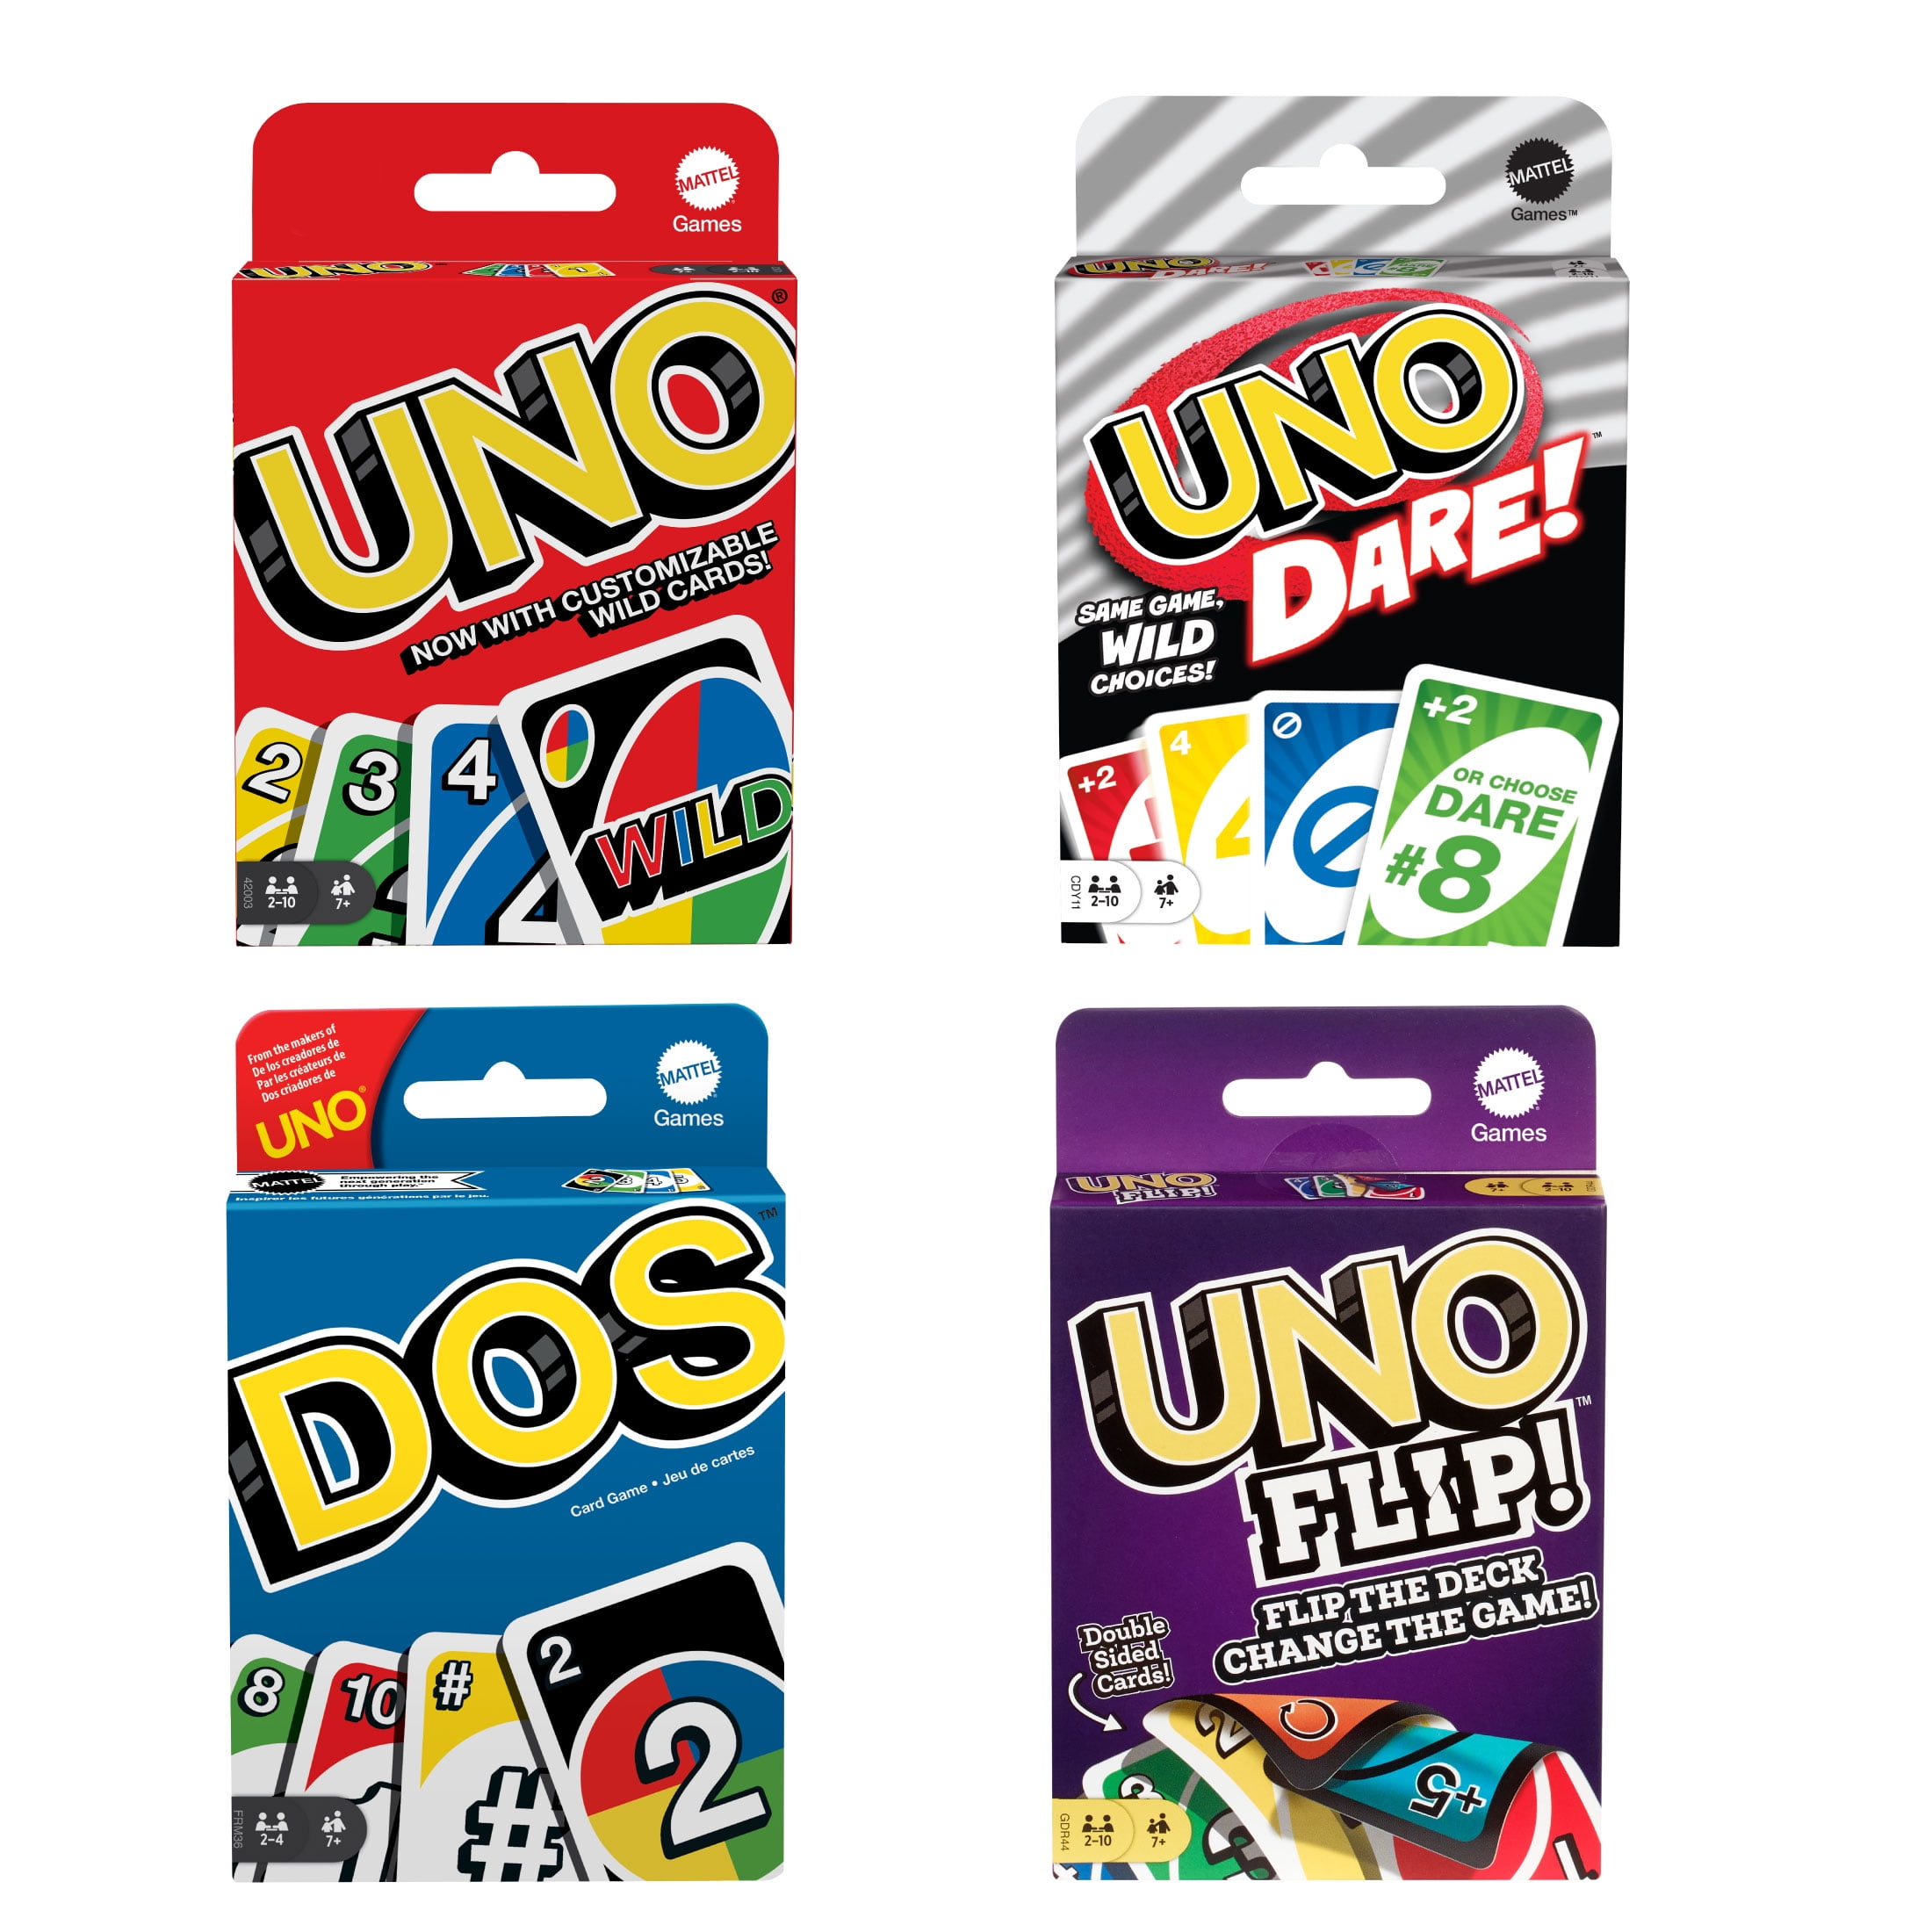 UNO Card Games Family & Friends Playing Card Game US Seller Free Shipping 